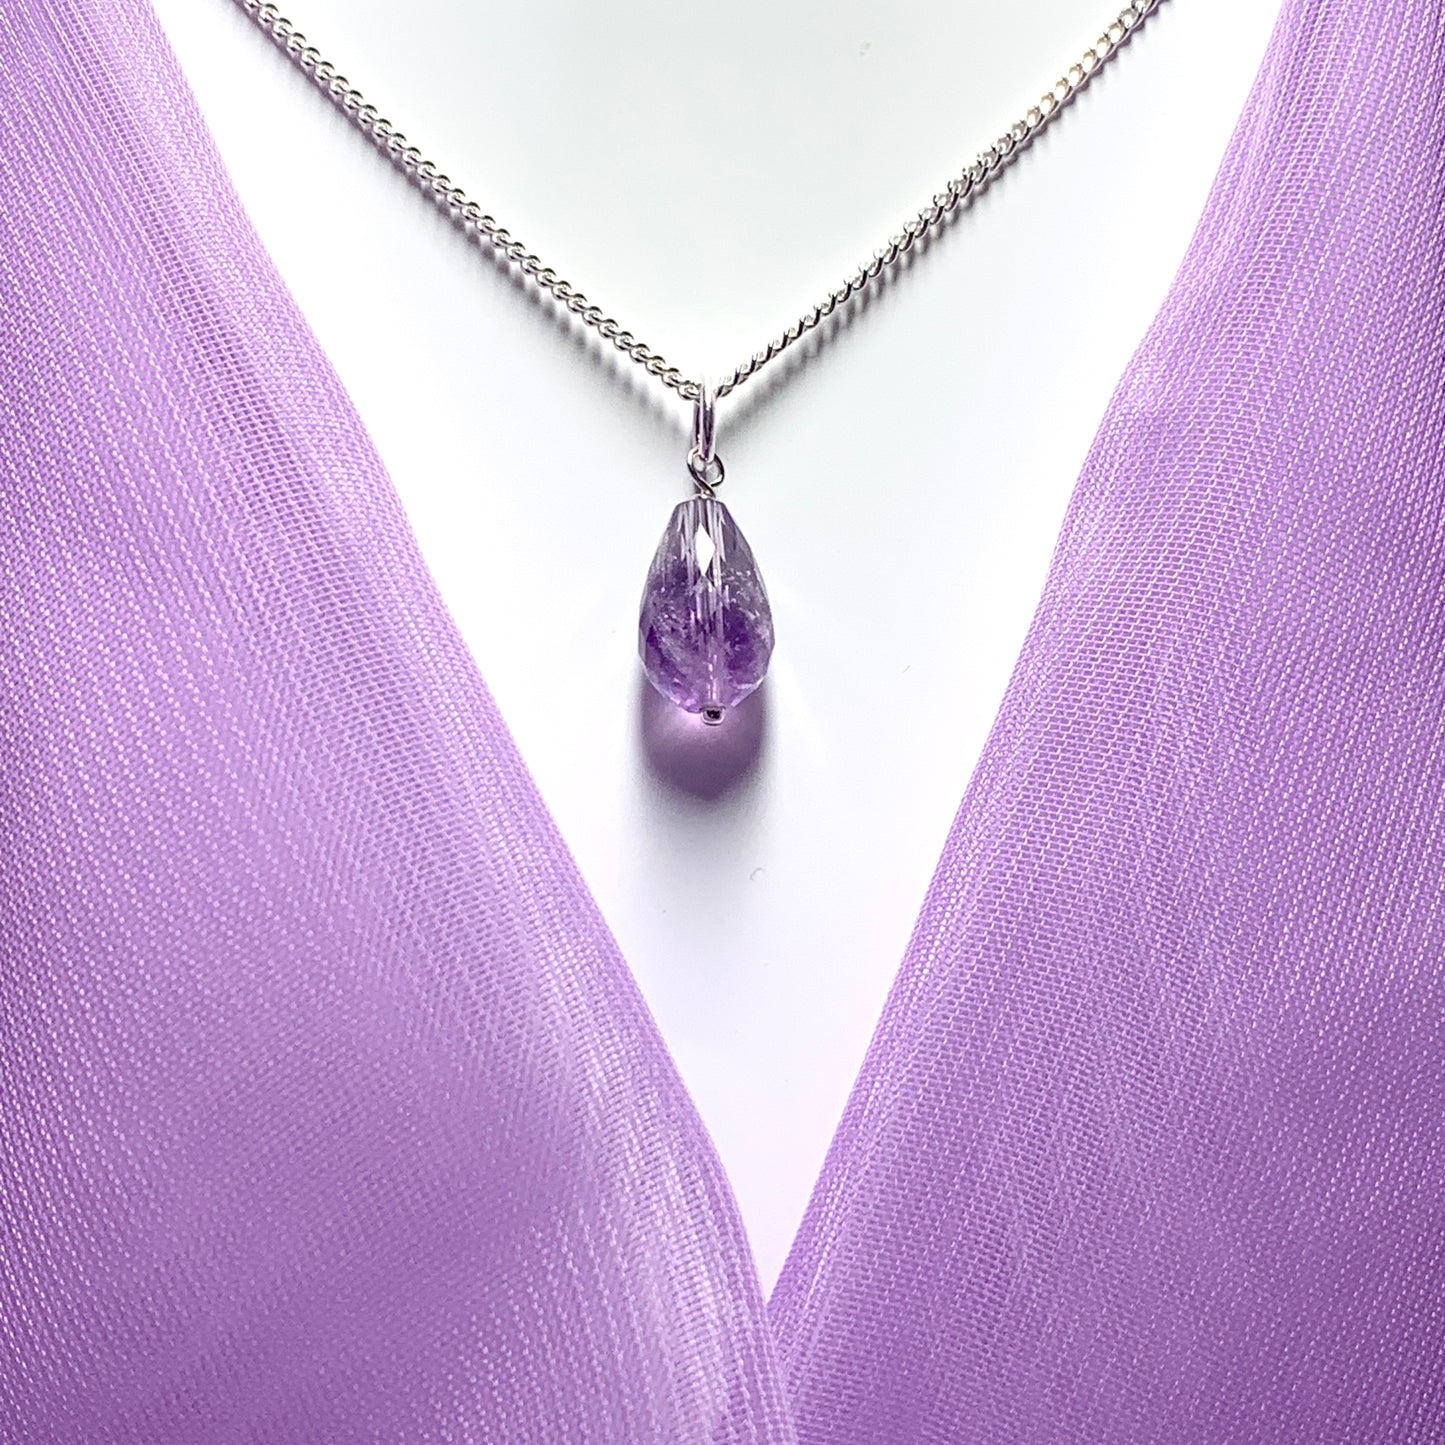 Small Tear Drop Silver Pear Shaped Amethyst Necklace Pendent